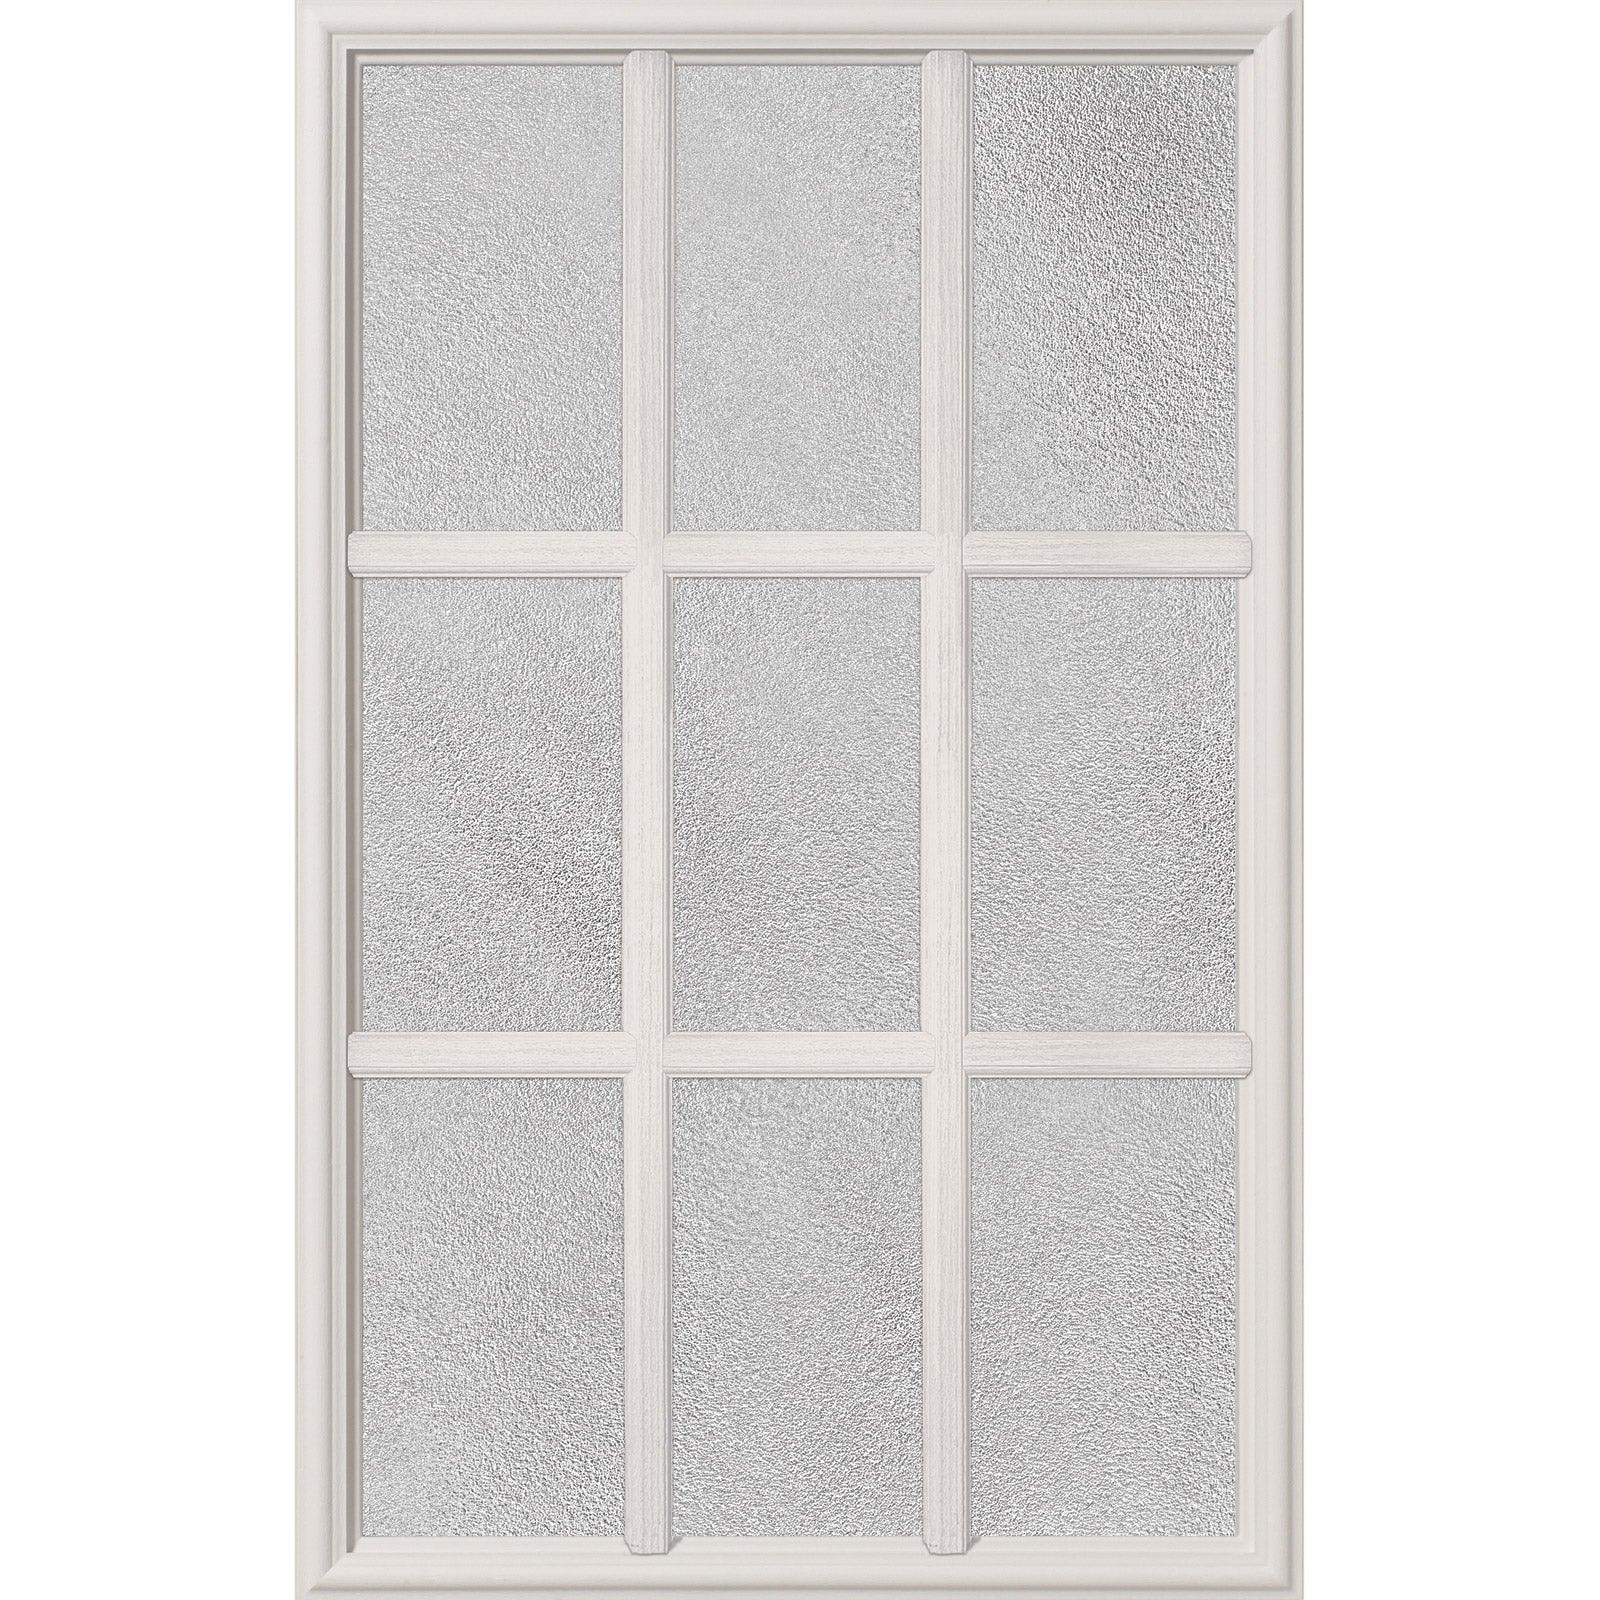 24 X 38 9 Light Replacement Frame Set for 1/2 thick door glass